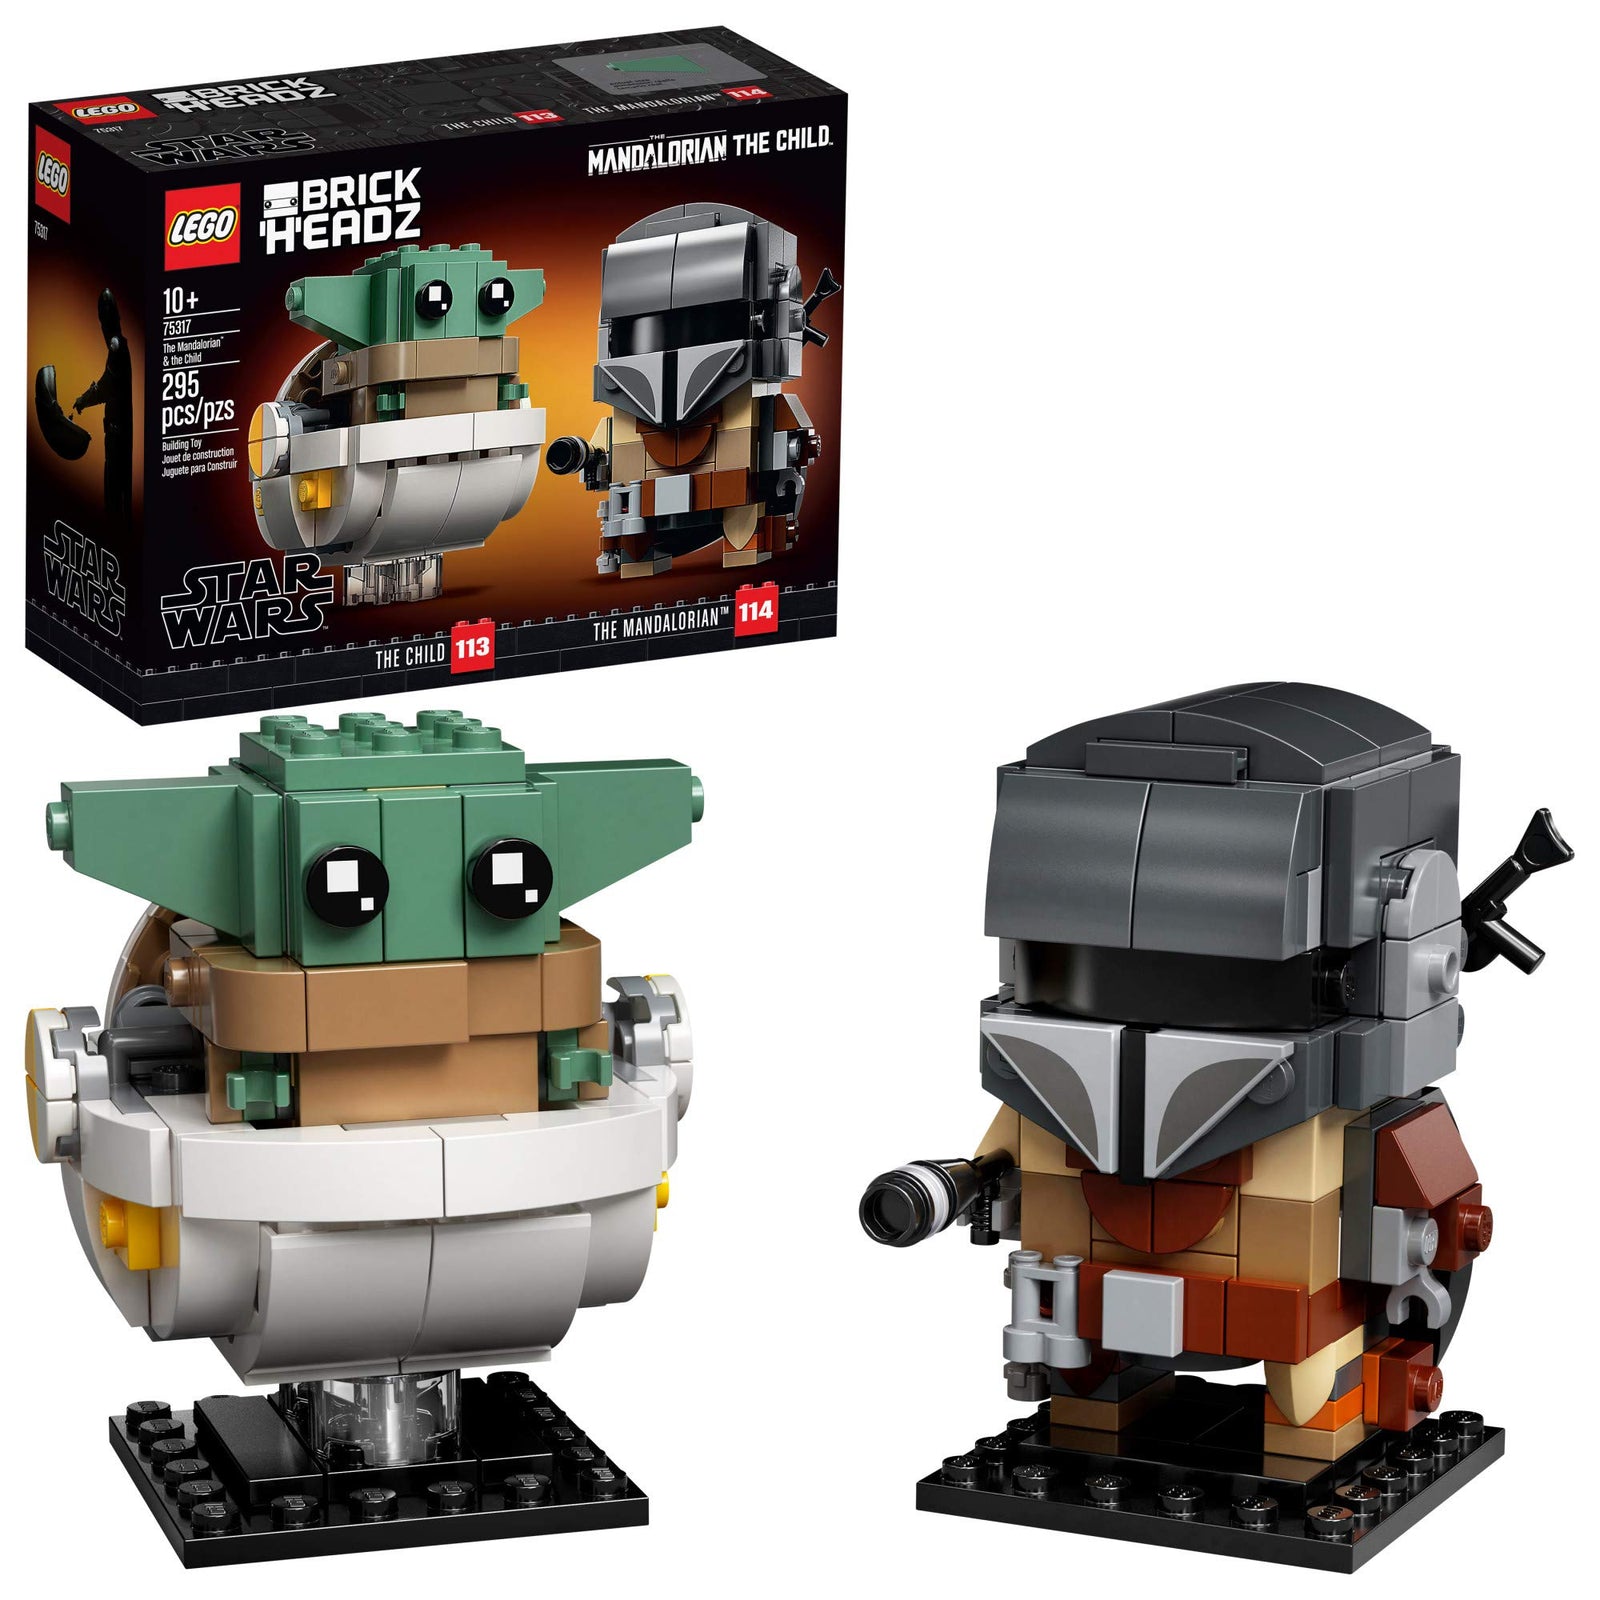 LEGO BrickHeadz Star Wars The Mandalorian & The Child 75317 Building Kit, Toy for Kids and Any Star Wars Fan Featuring Buildable The Mandalorian and The Child Figures (295 Pieces)